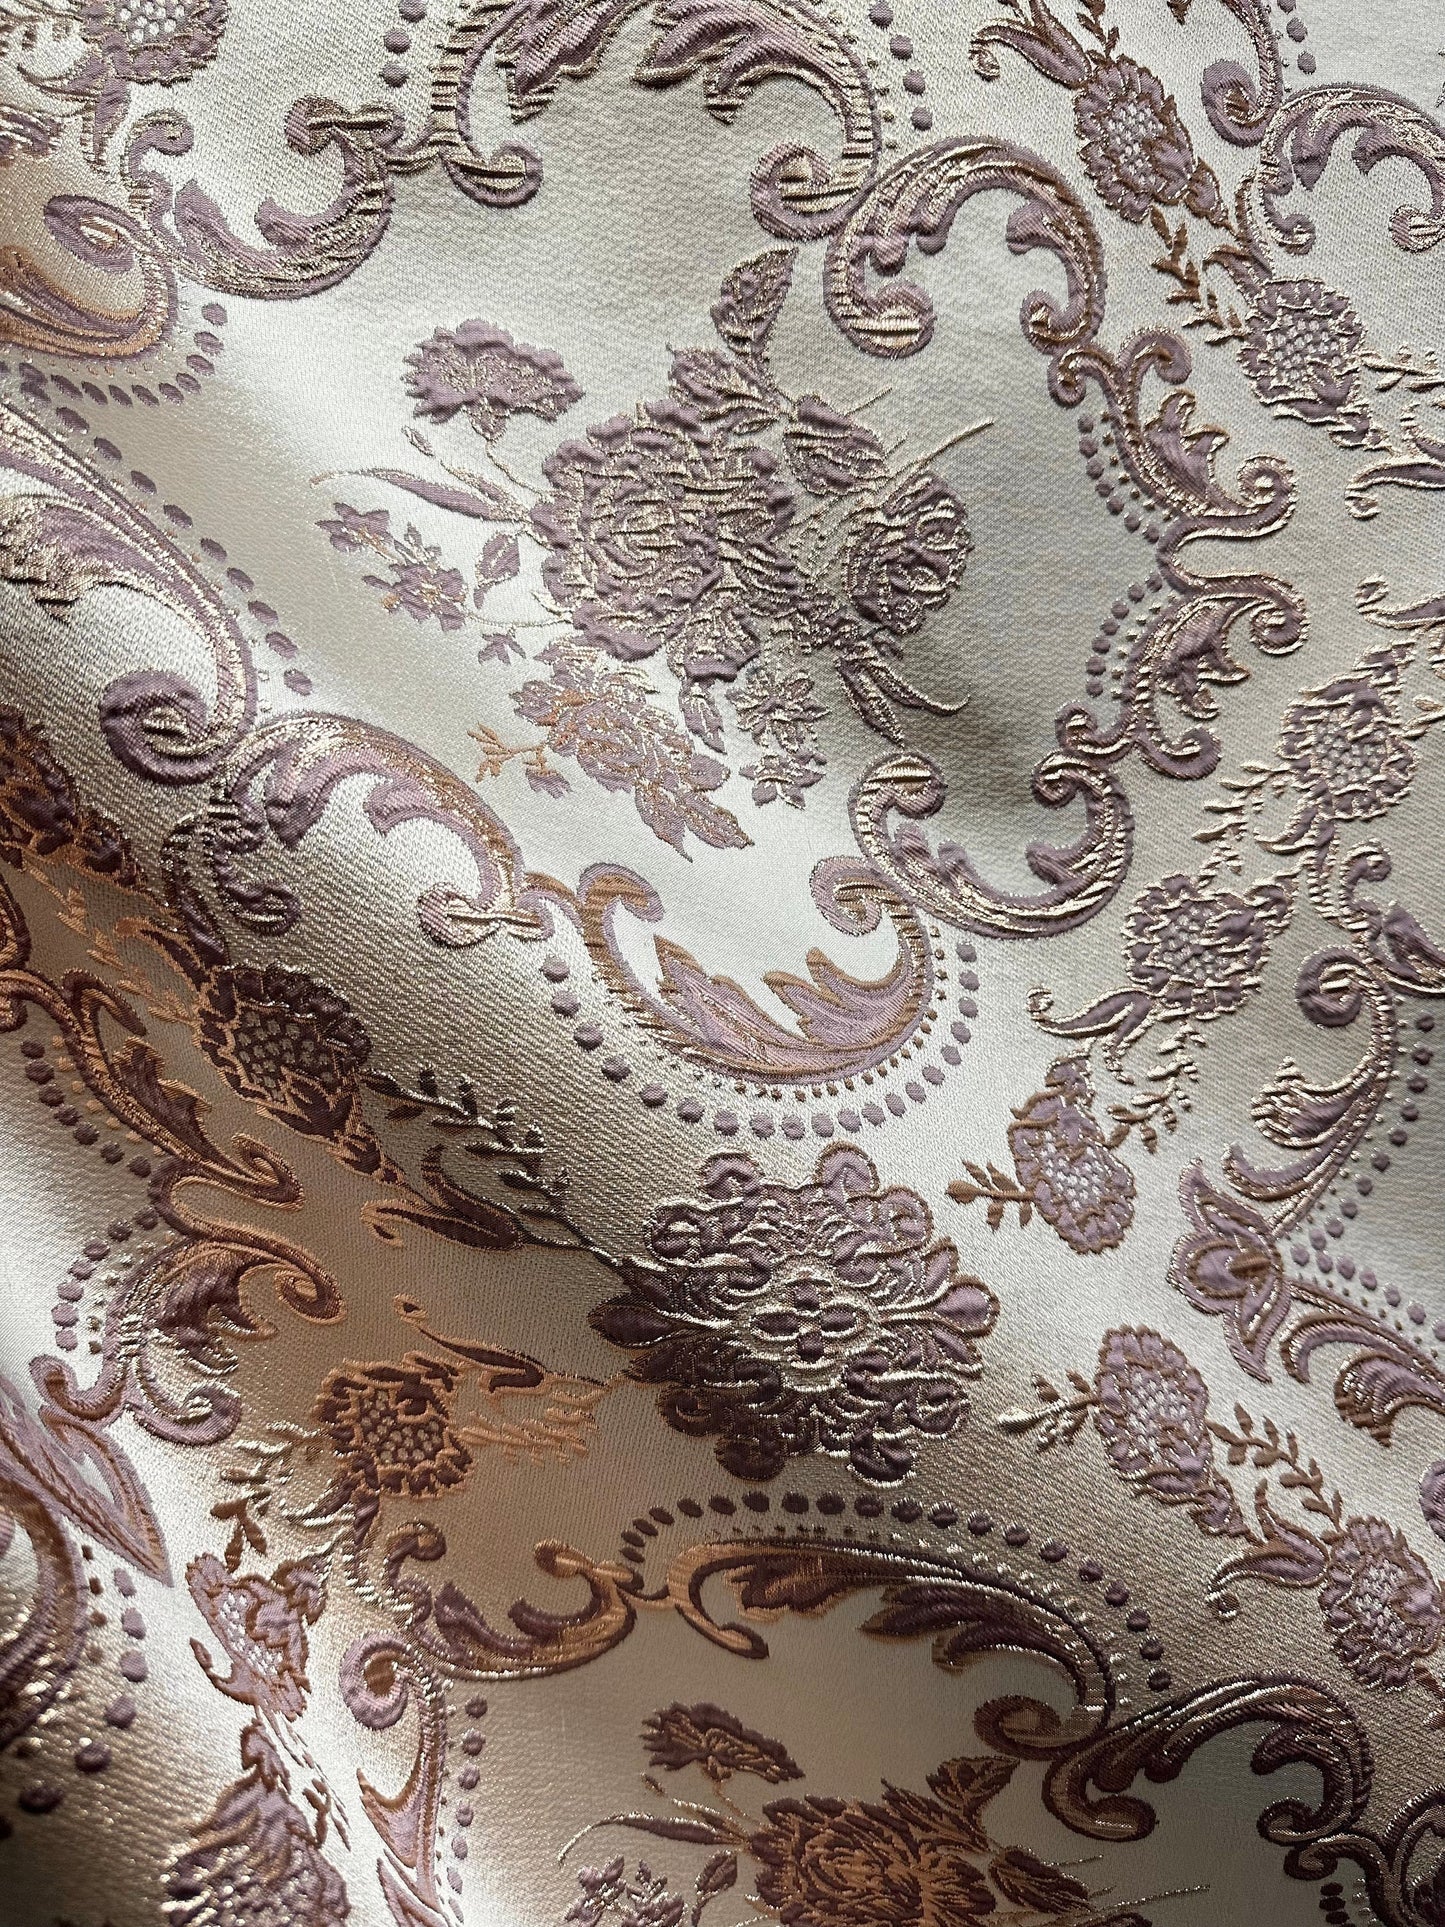 MAUVE GOLD Floral Brocade Fabric (60 in.) Sold By The Yard